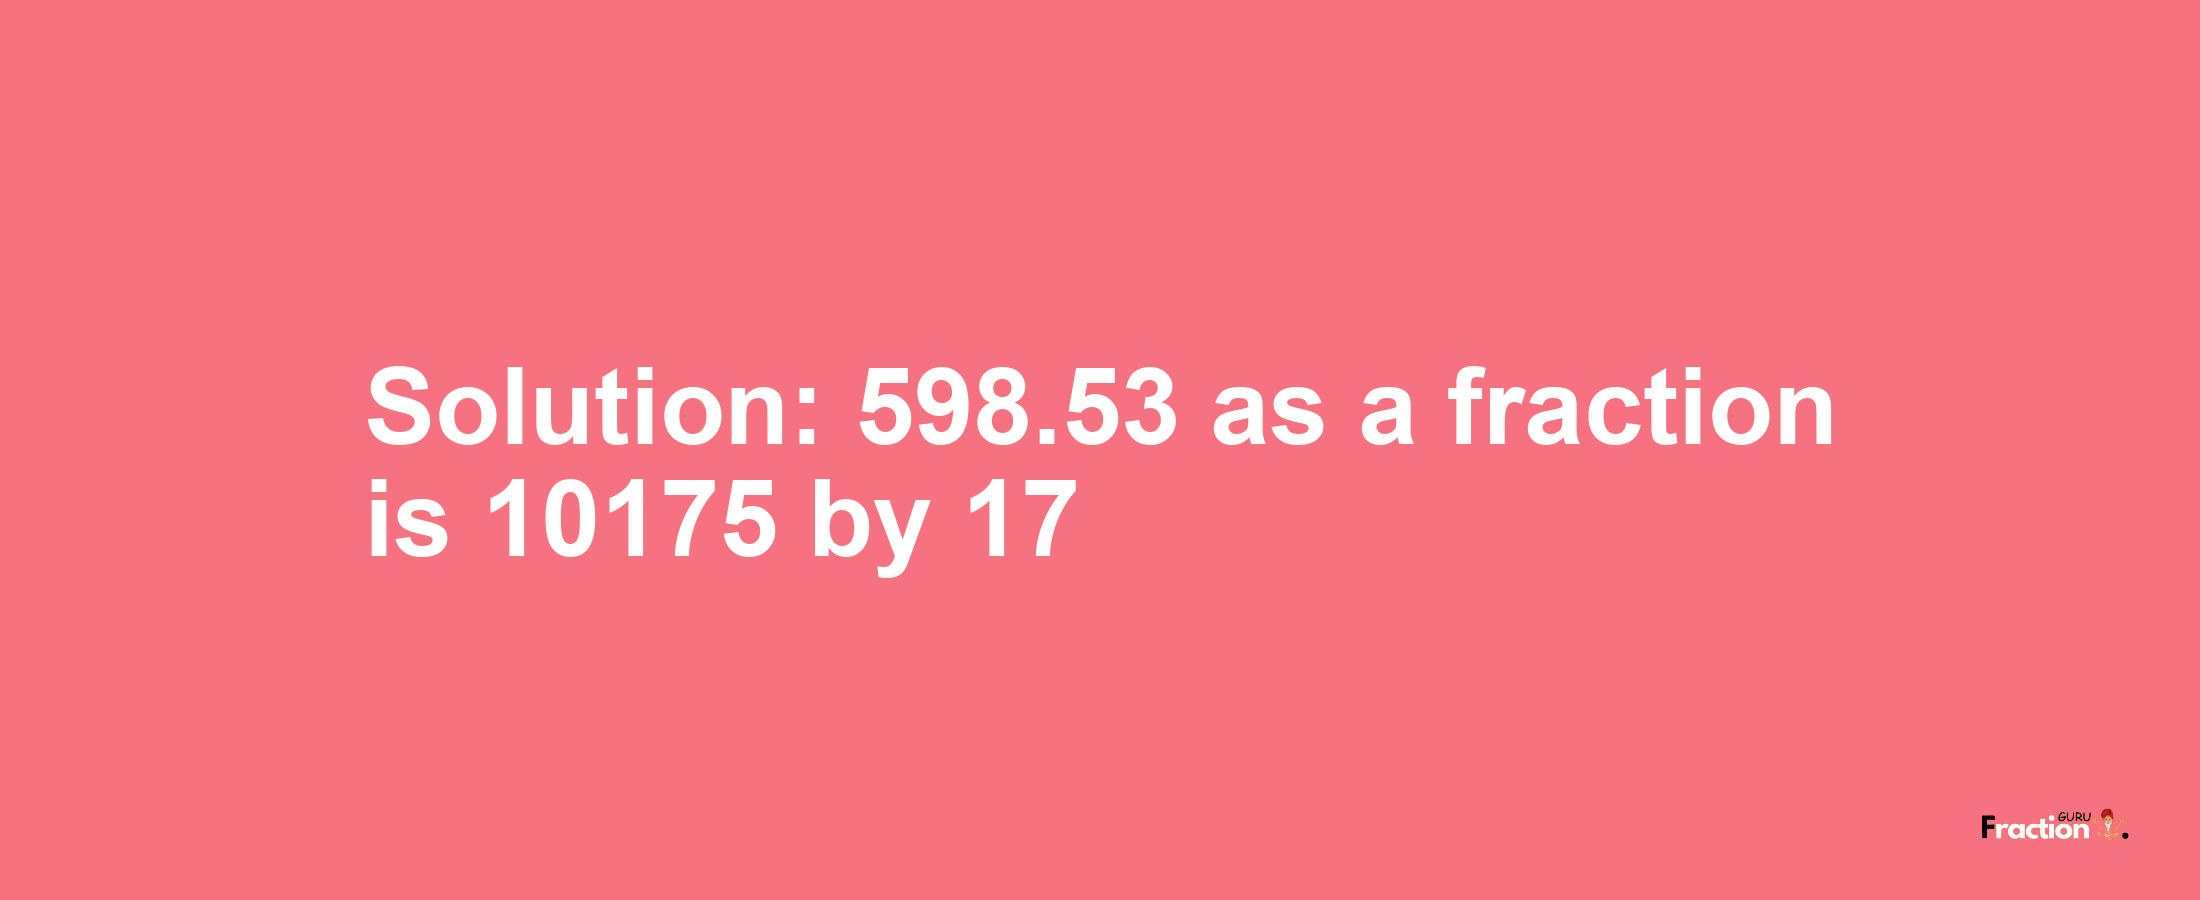 Solution:598.53 as a fraction is 10175/17